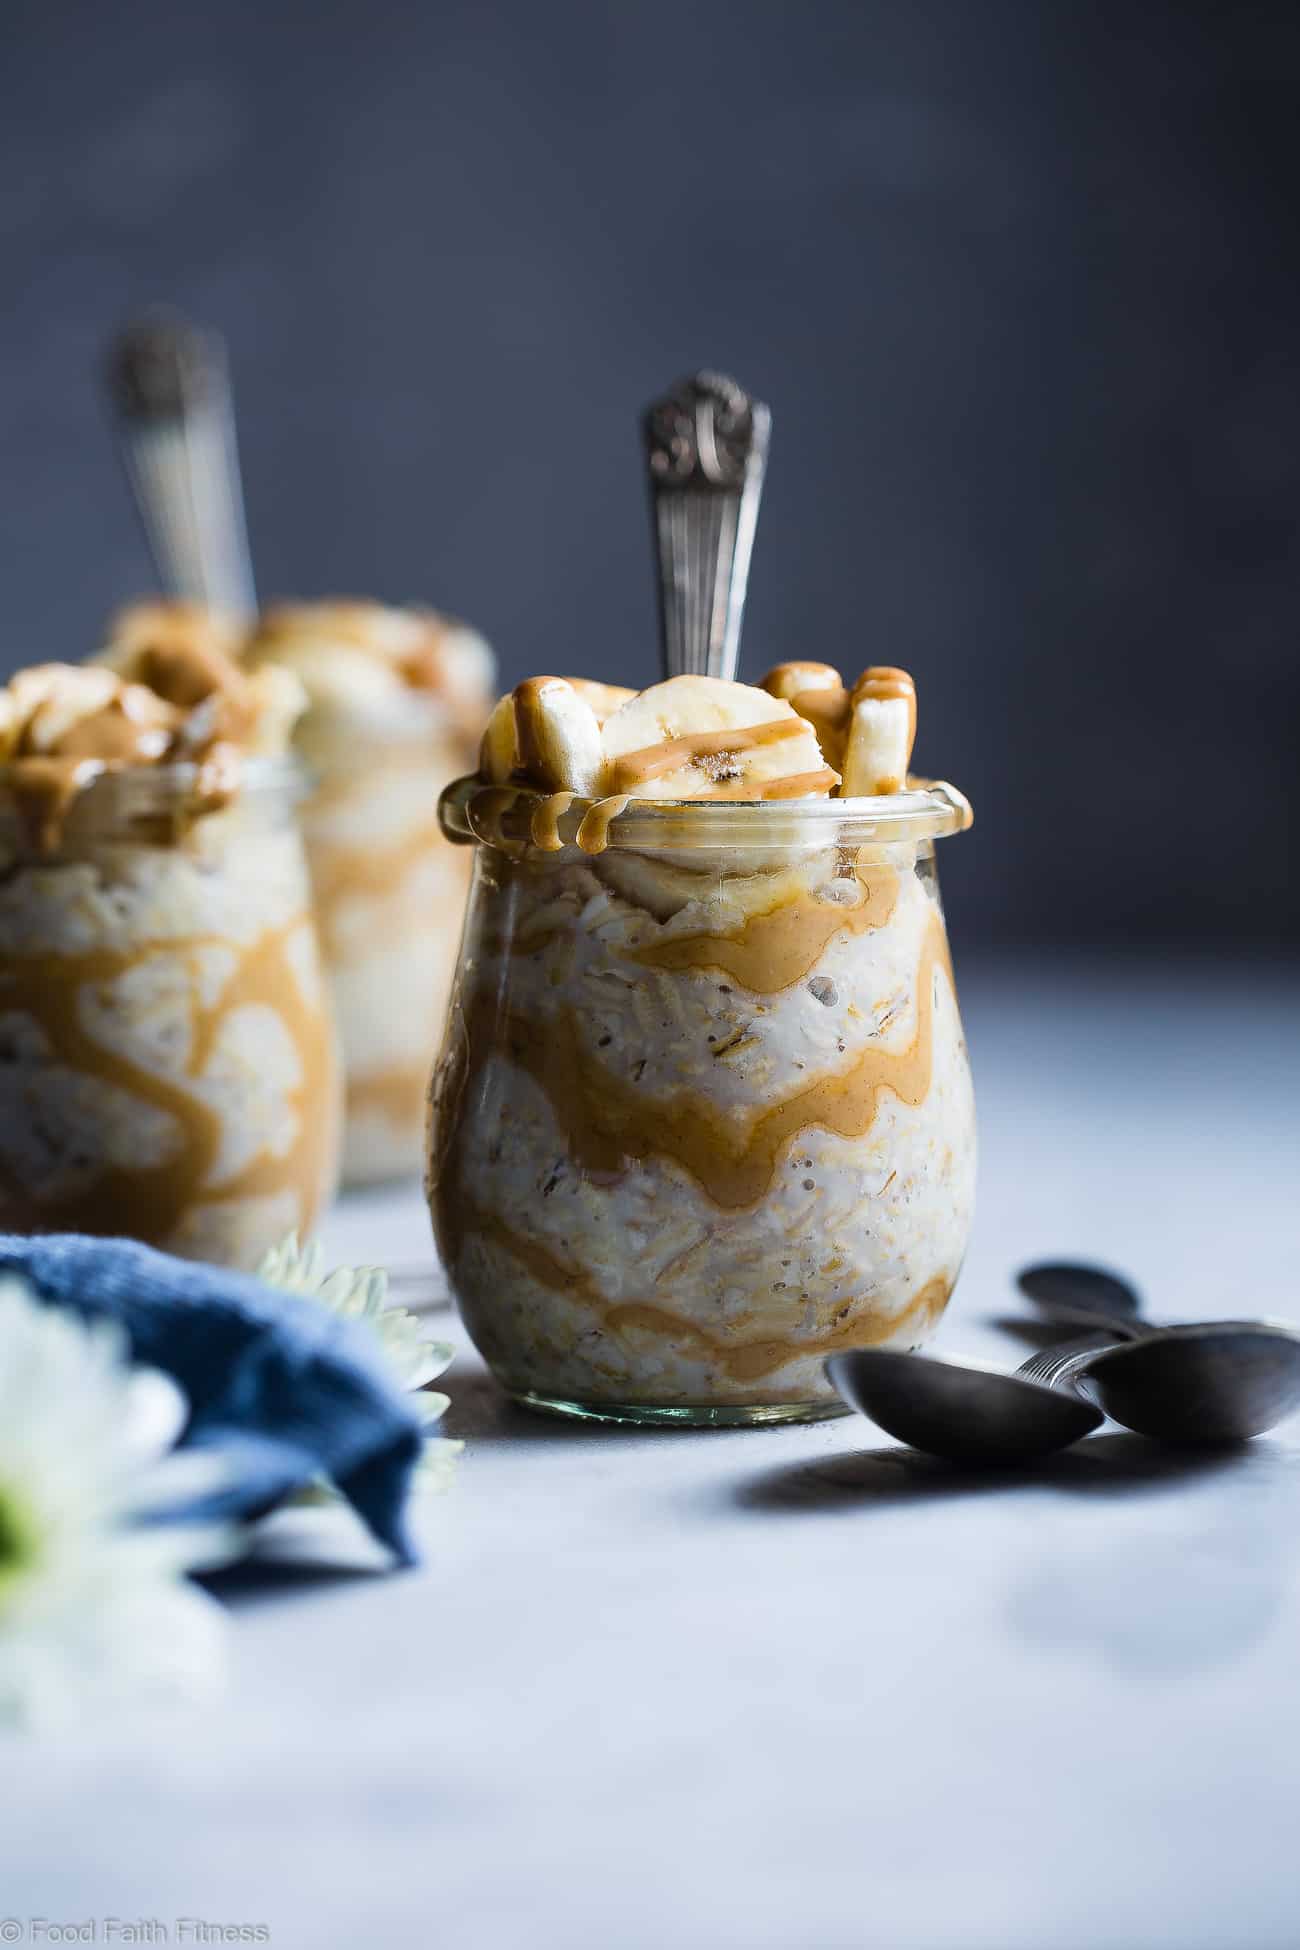 Banana Peanut Butter Overnight Oats Recipe with Almond Milk - This make ahead, vegan banana overnight oats recipe is a healthy, 4 ingredient way to start the day! dairy, sugar and, gluten free and kid friendly too! | Foodfaithfitness.com | @FoodFaithFit